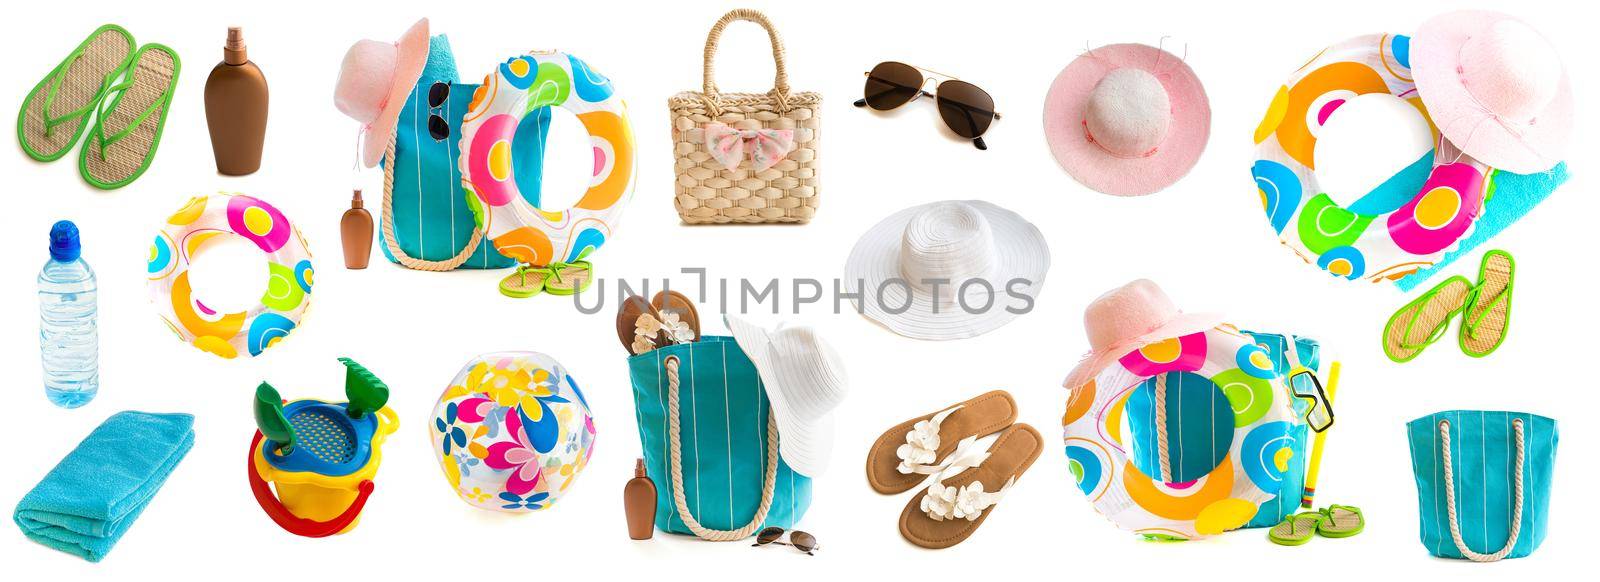 Photo collage of beach accessories and toys by tan4ikk1